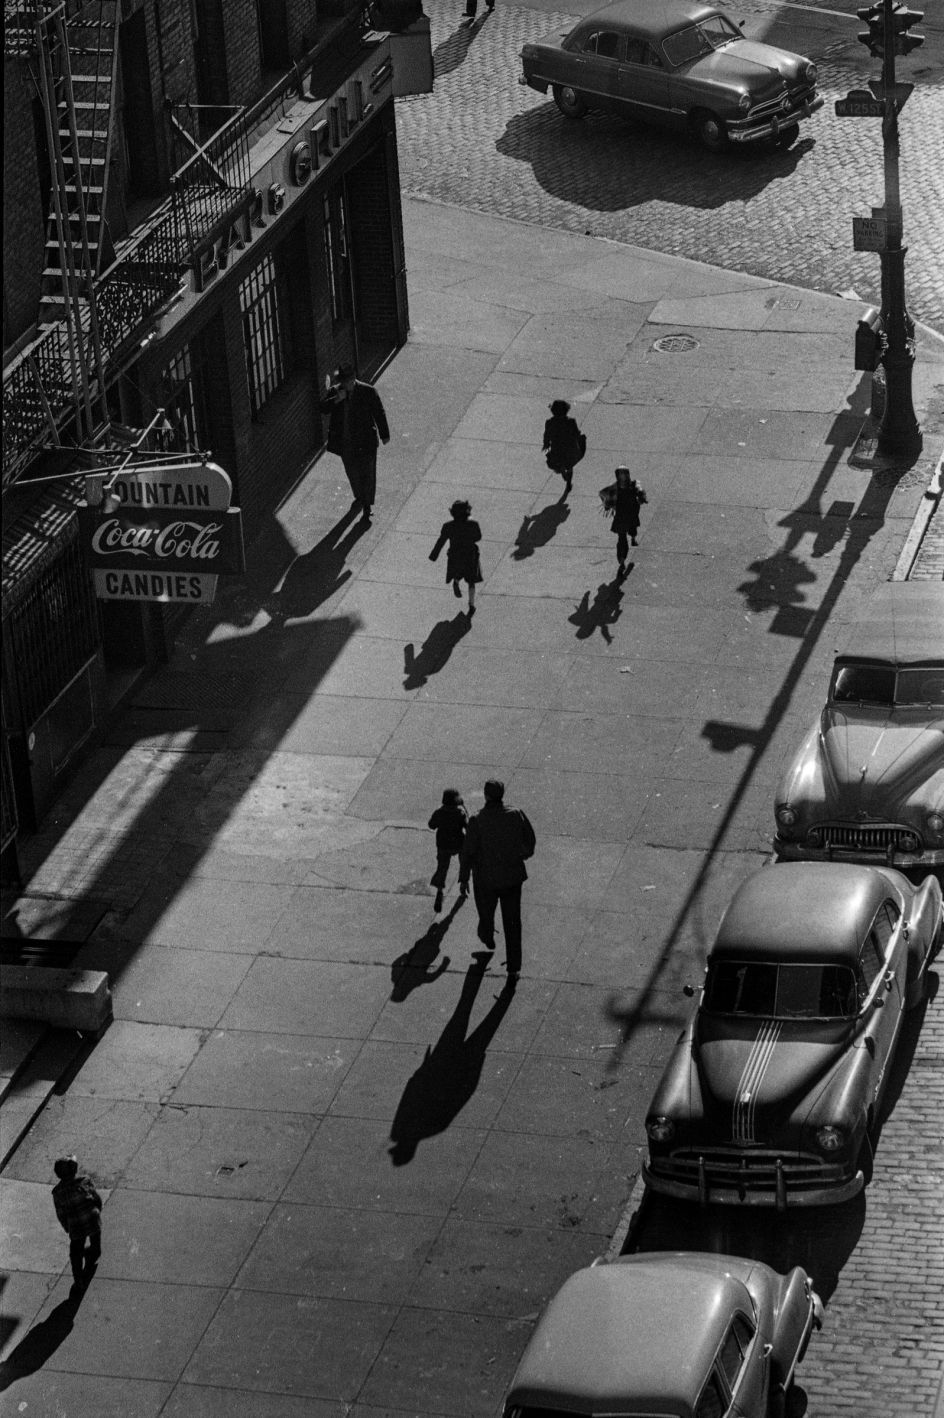 125th Street From Elevated Train, 1950 © Estate of Harold Feinstein All rights reserved